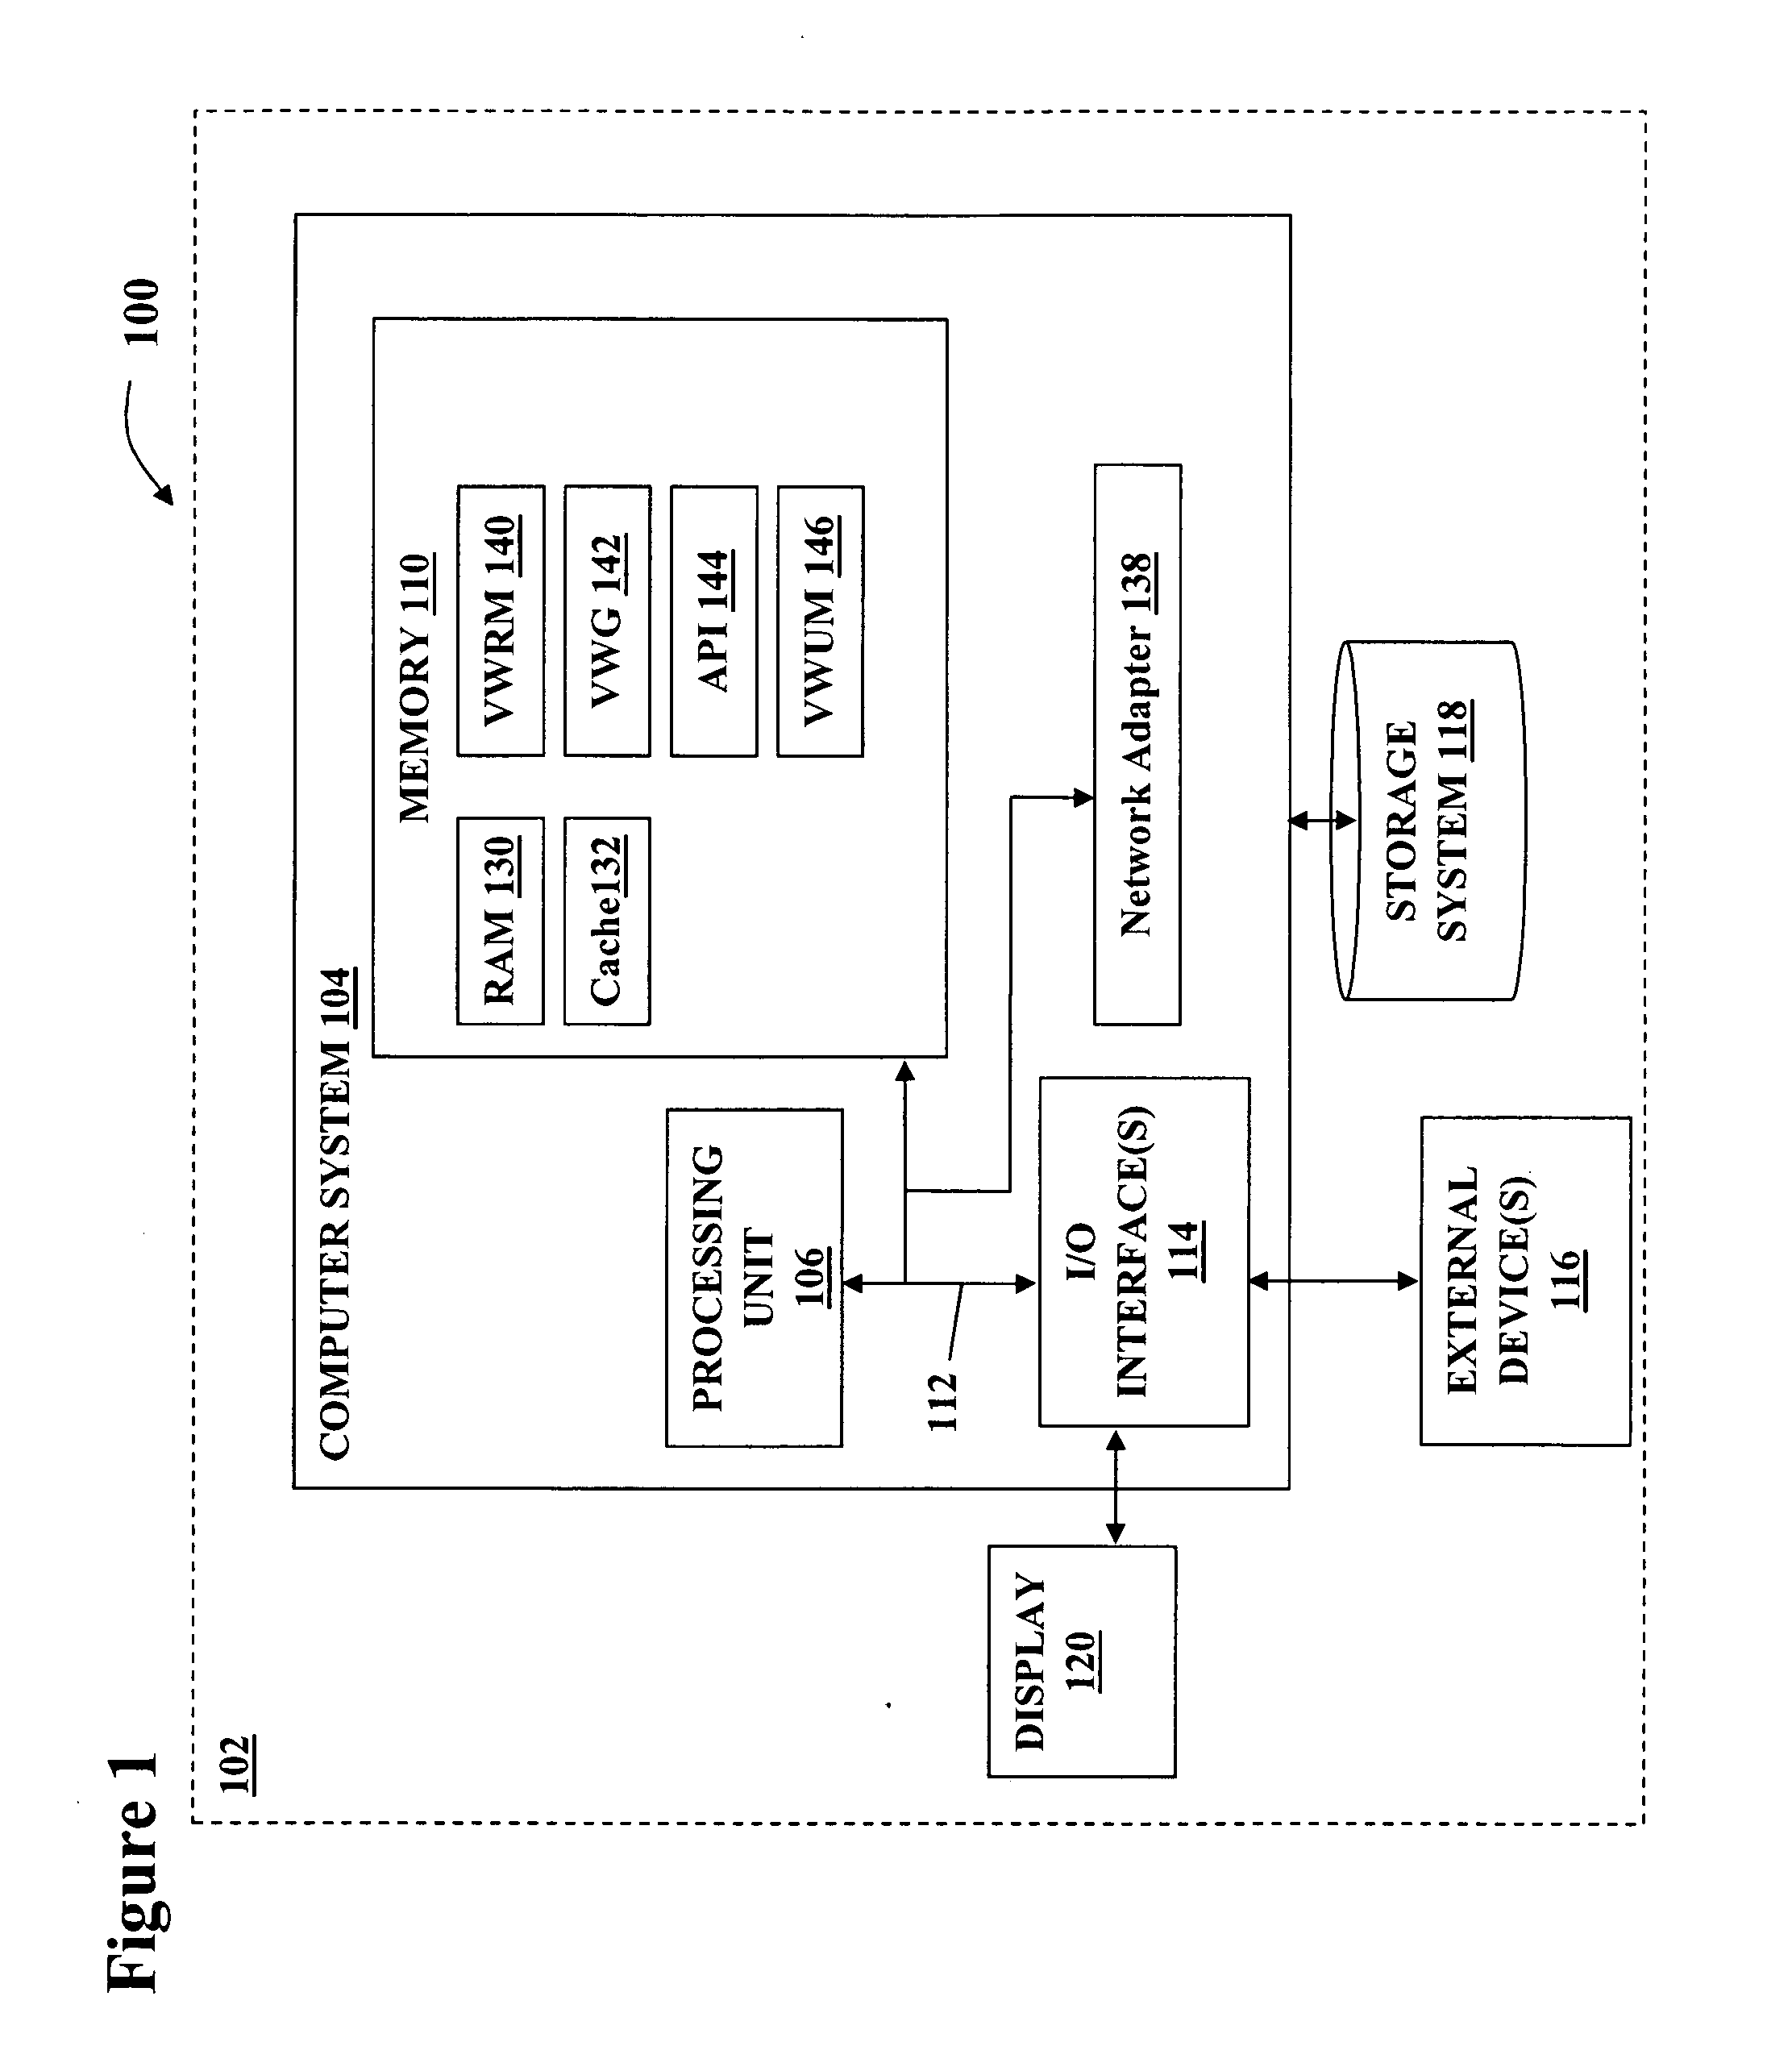 System and method for automatically generating virtual world environments based upon existing physical environments